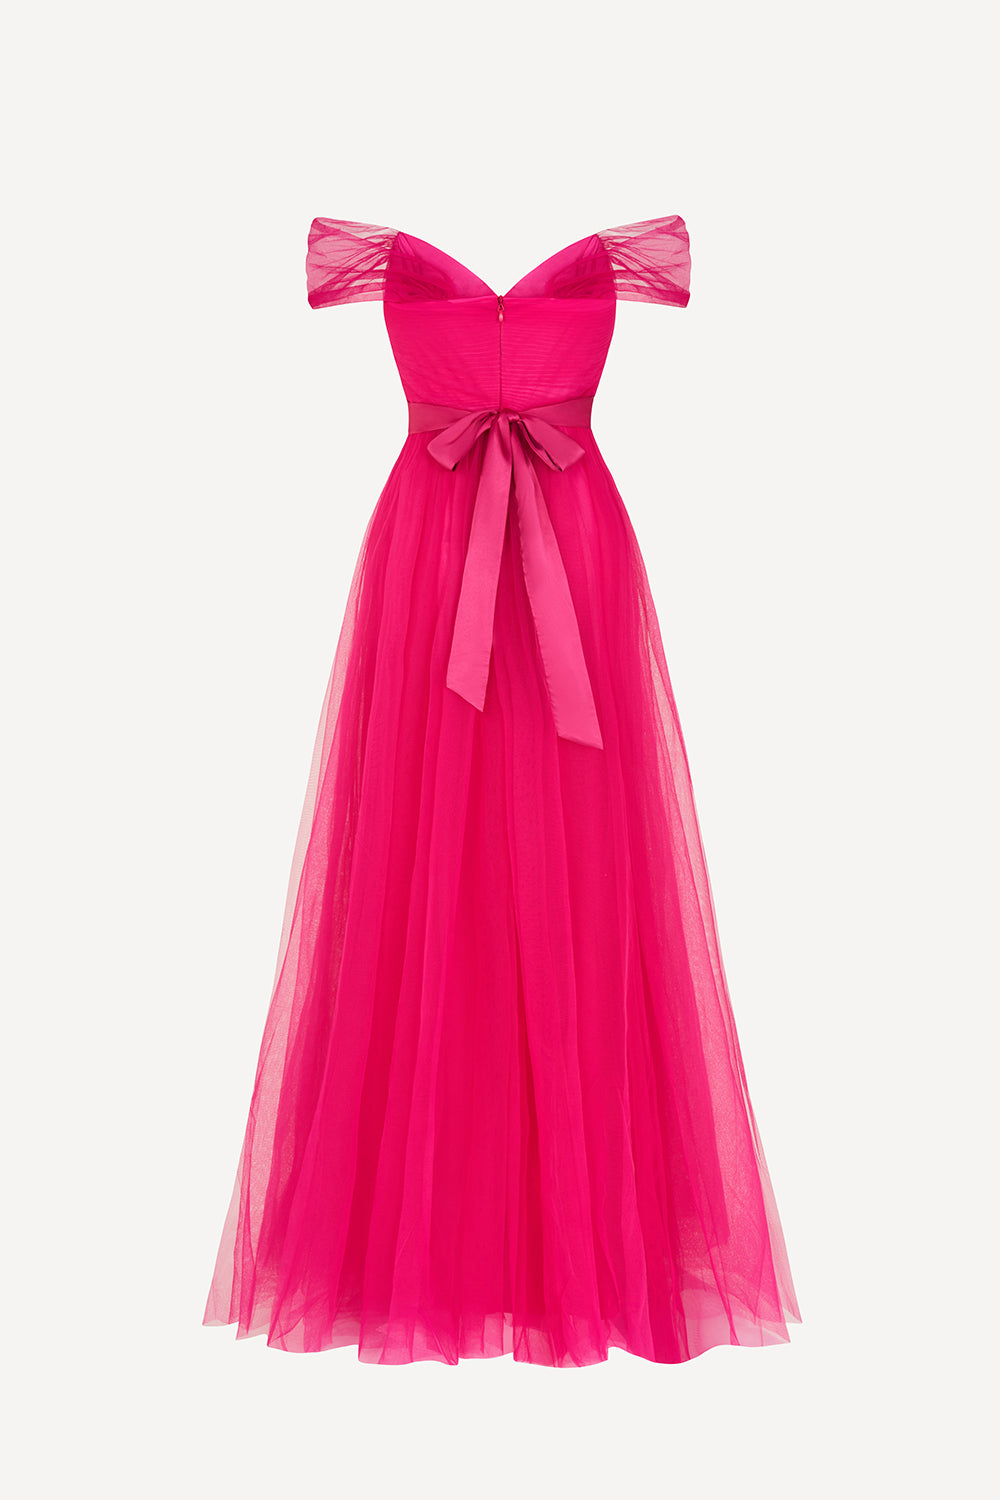 Fairytale gown in hot pink